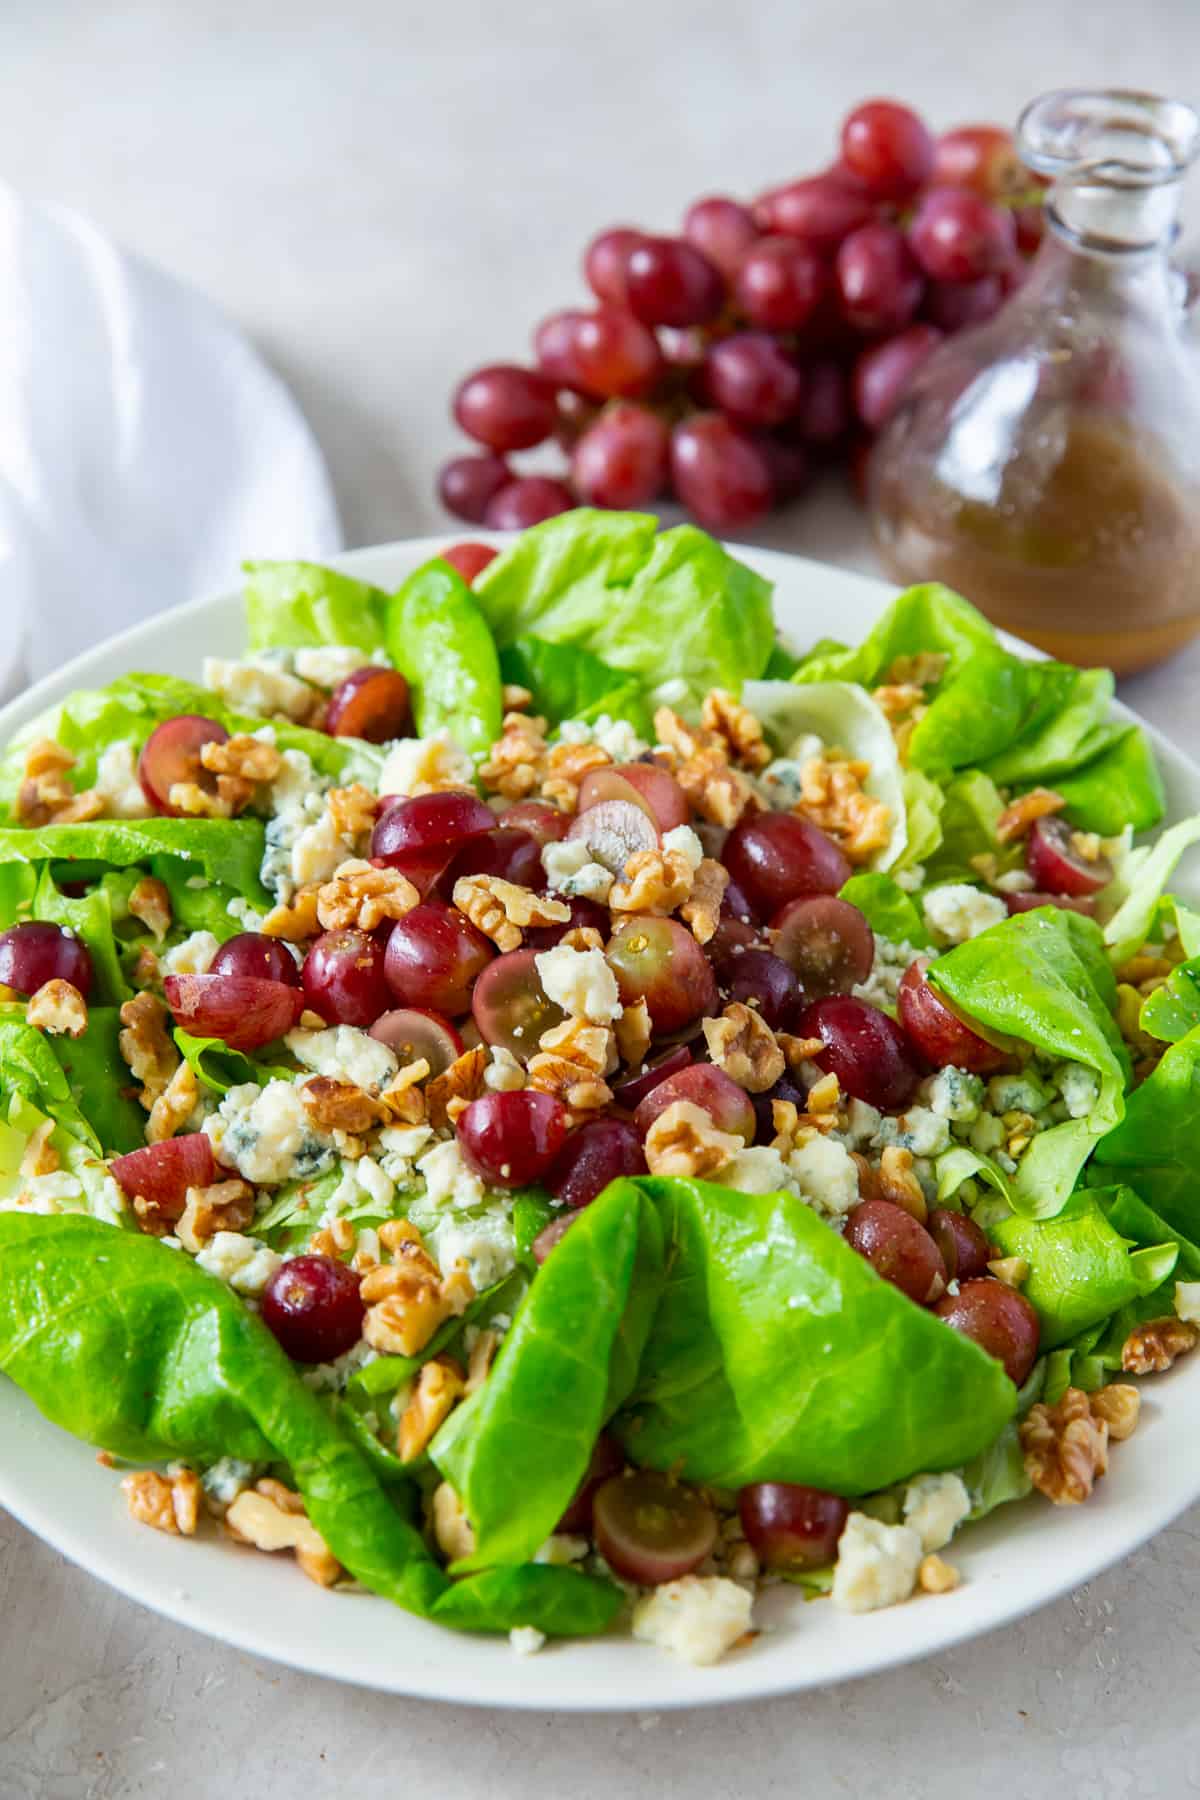 Butter lettuce salad with grapes and walnuts on a white plate with grapes in the background.